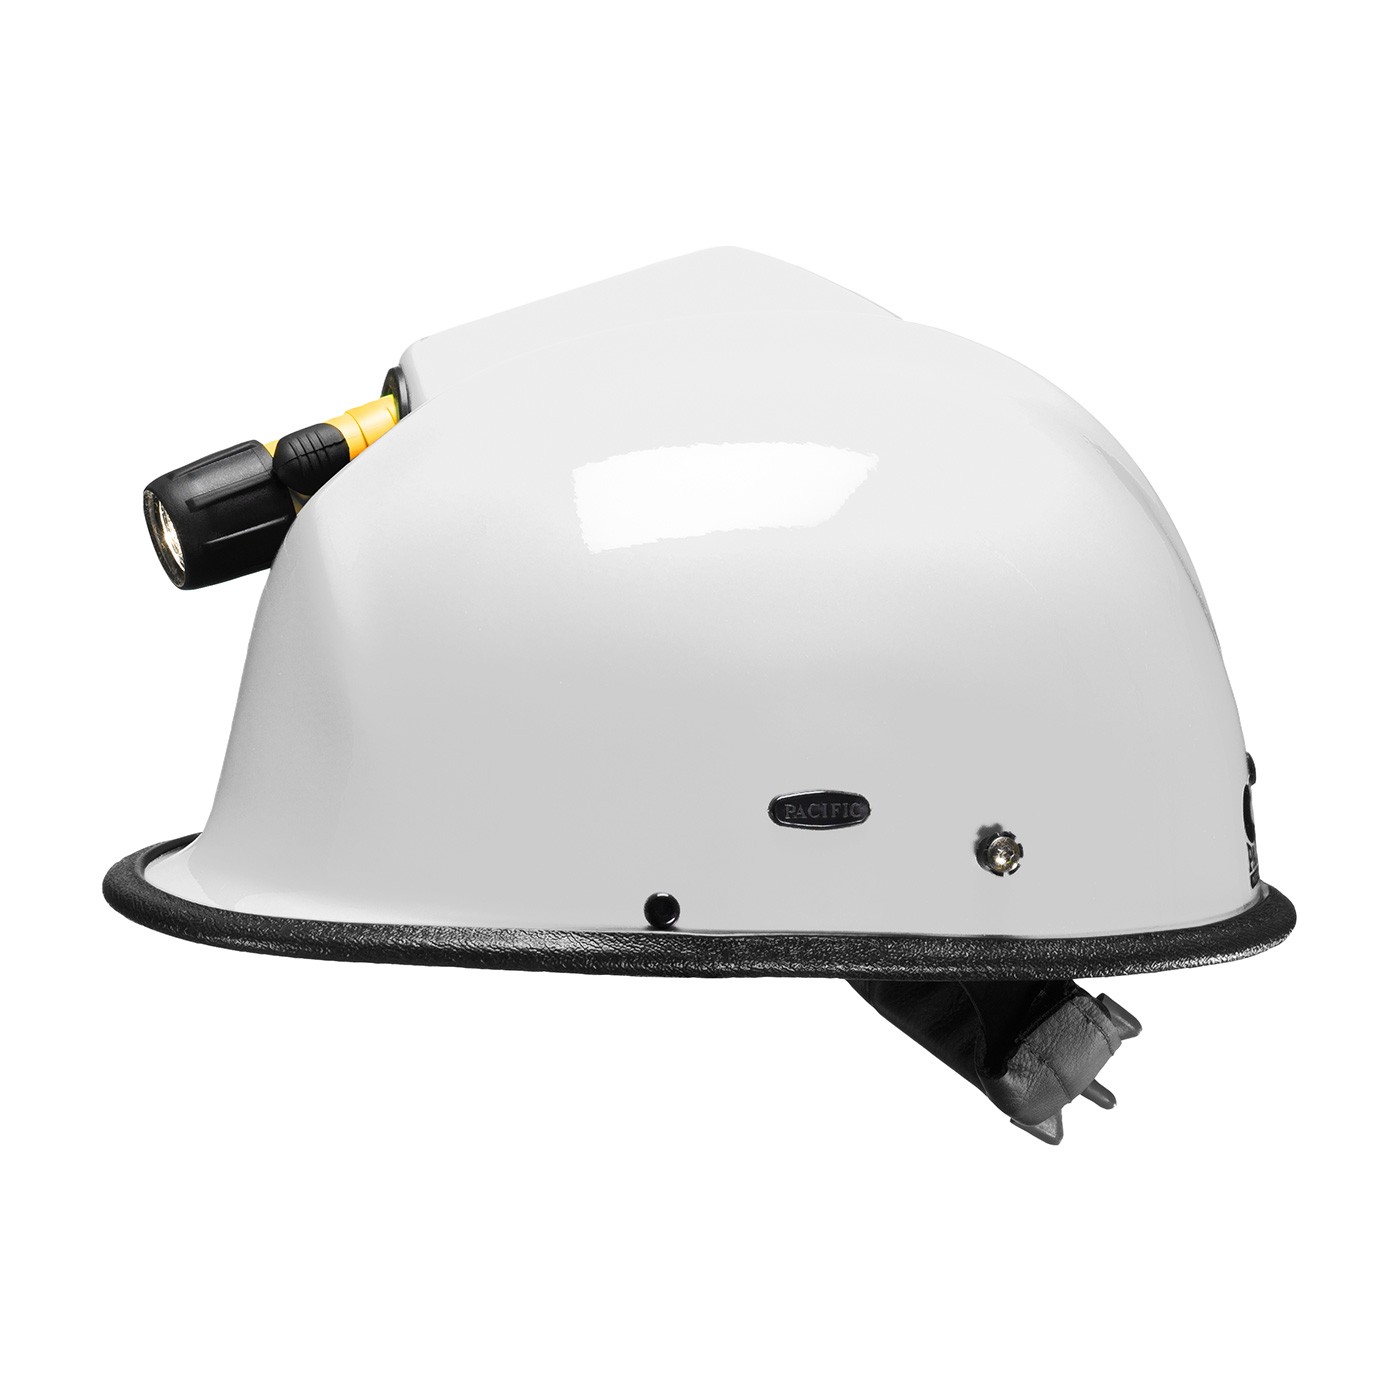 R3T KIWI™ Rescue Helmet with ESS Goggle Mounts and Built-in Light Holder  (#806-30XX)